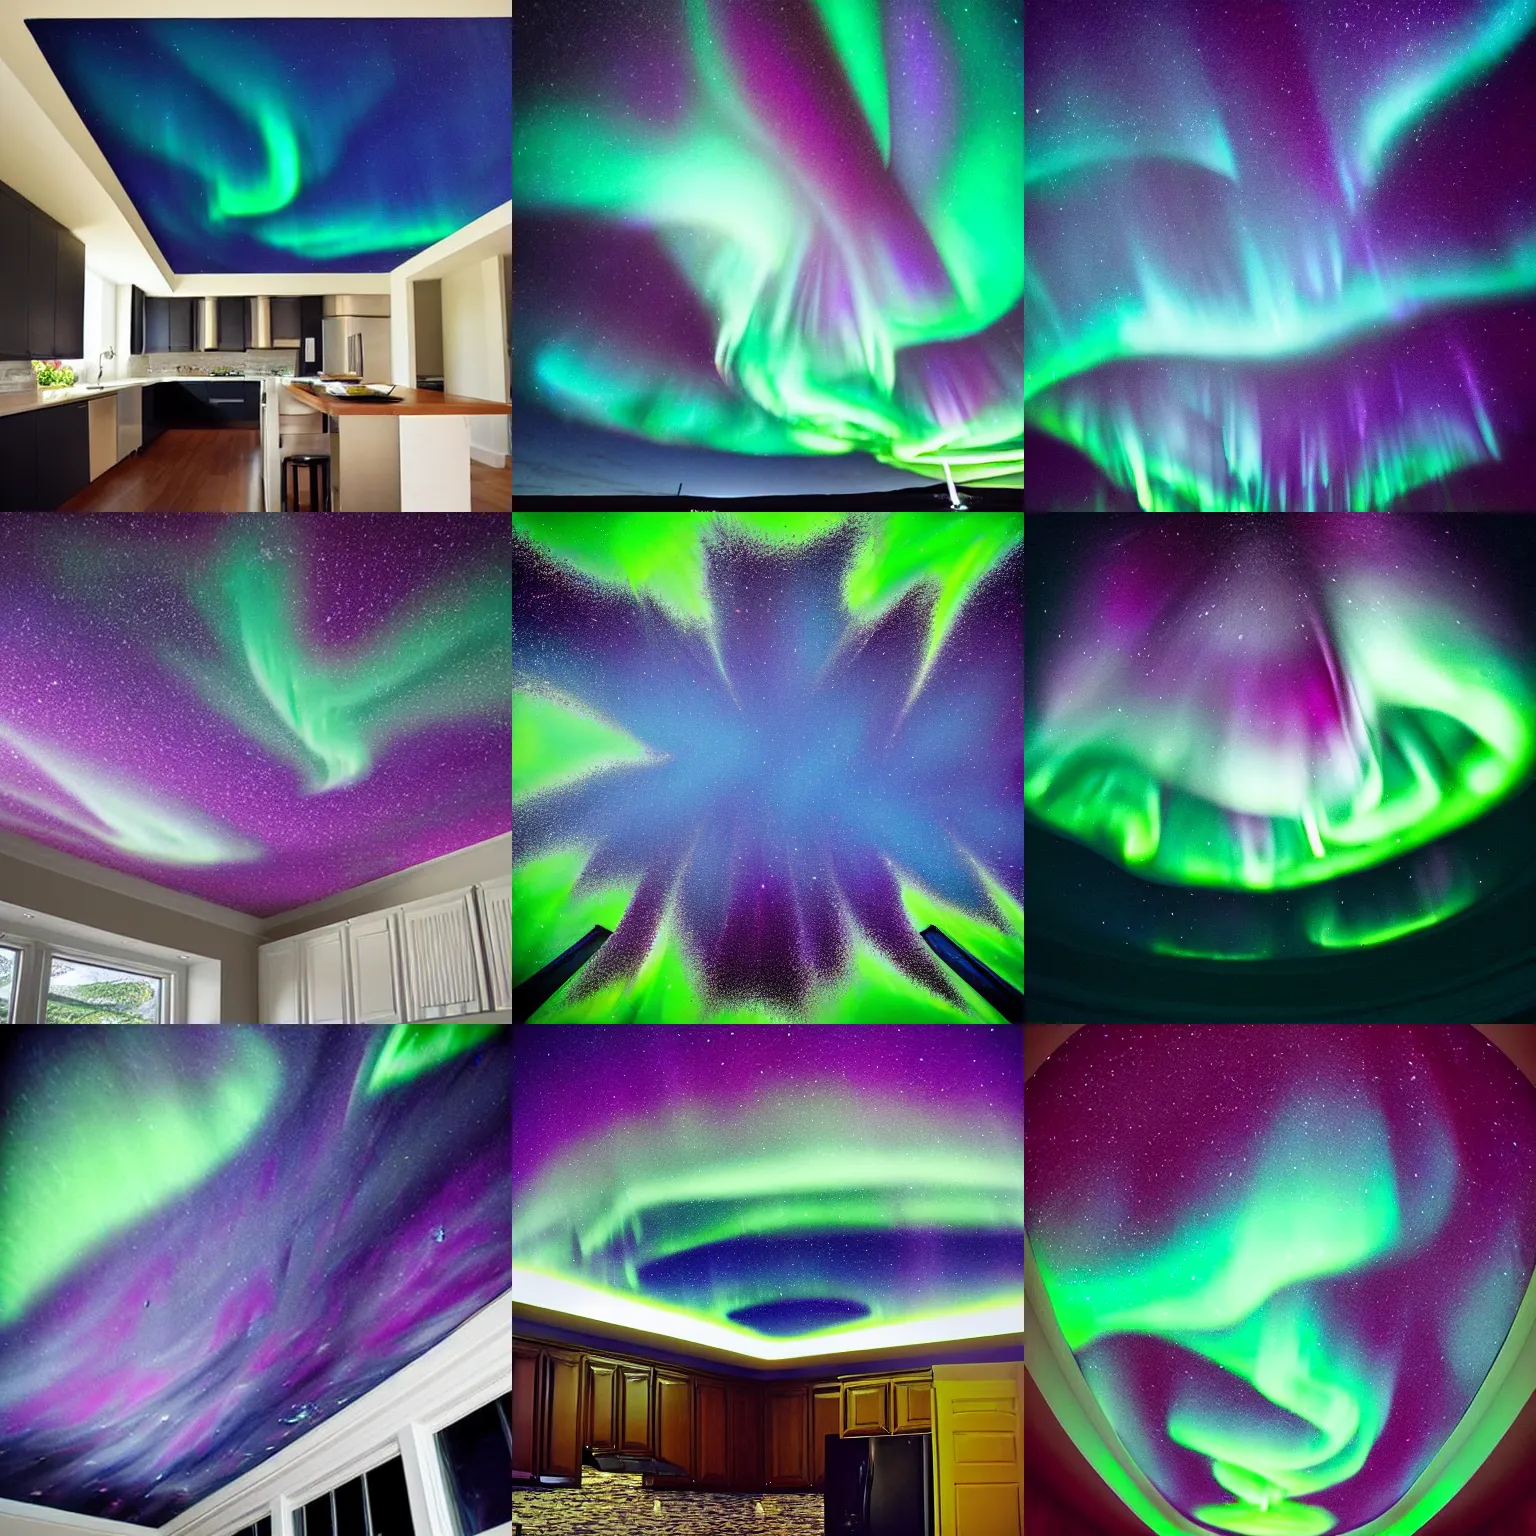 Prompt: “Award winning photo of Aurora Borealis painted on a kitchen ceiling ”